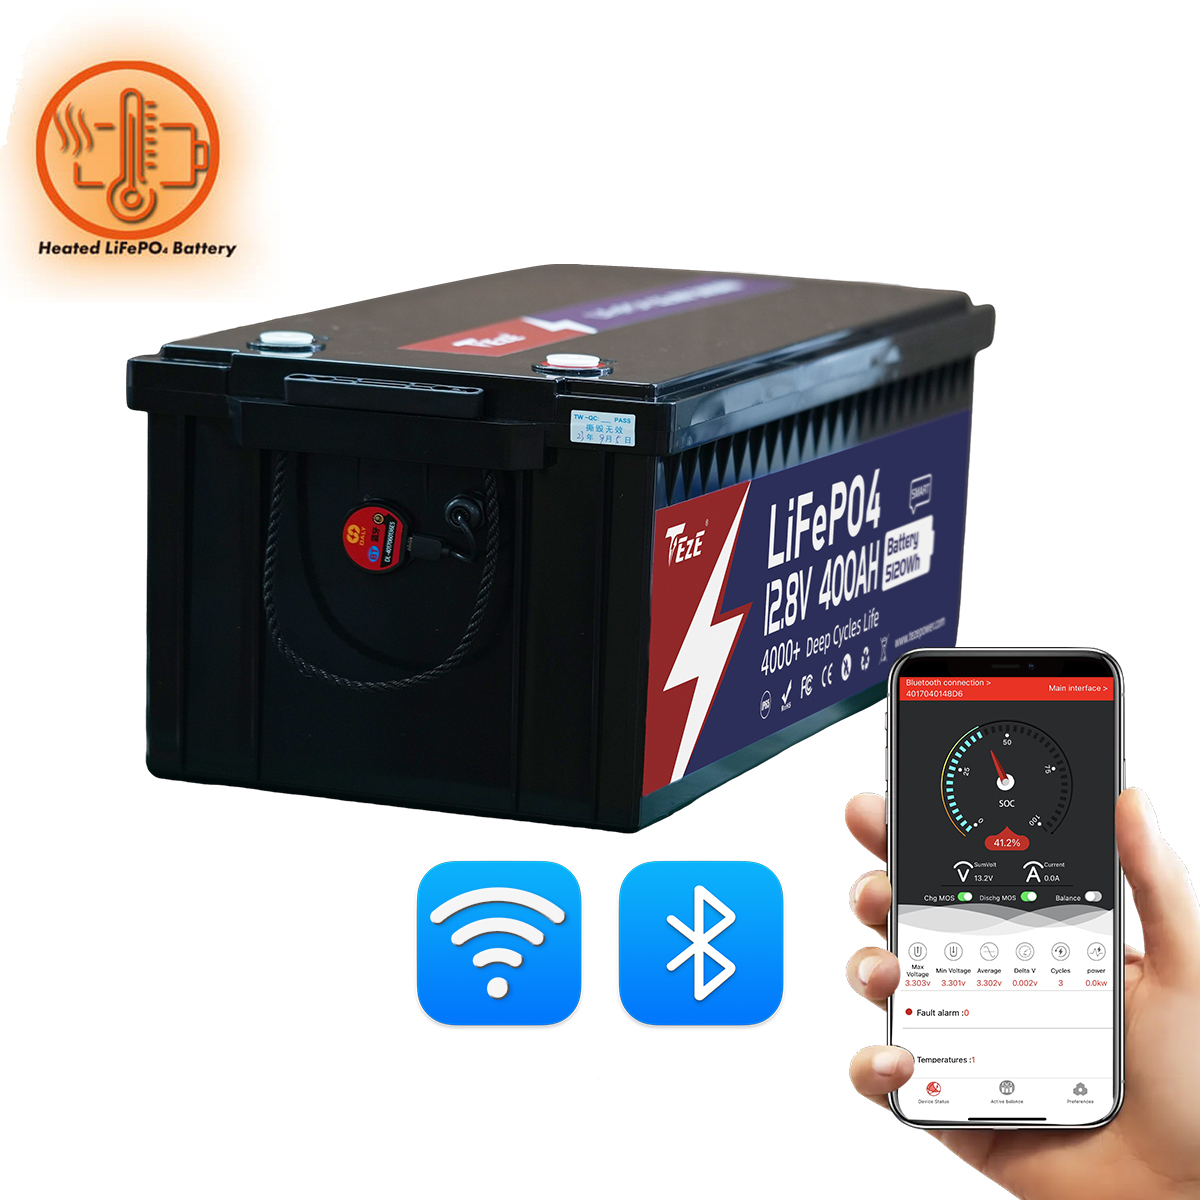 New Add WiFi-TezePower 12V 400Ah LiFePO4 Battery with WiFi and Bluetooth, Self-heating and Active Balancer, Built-in 250A Daly BMS(WiFi External Version)-TezePower